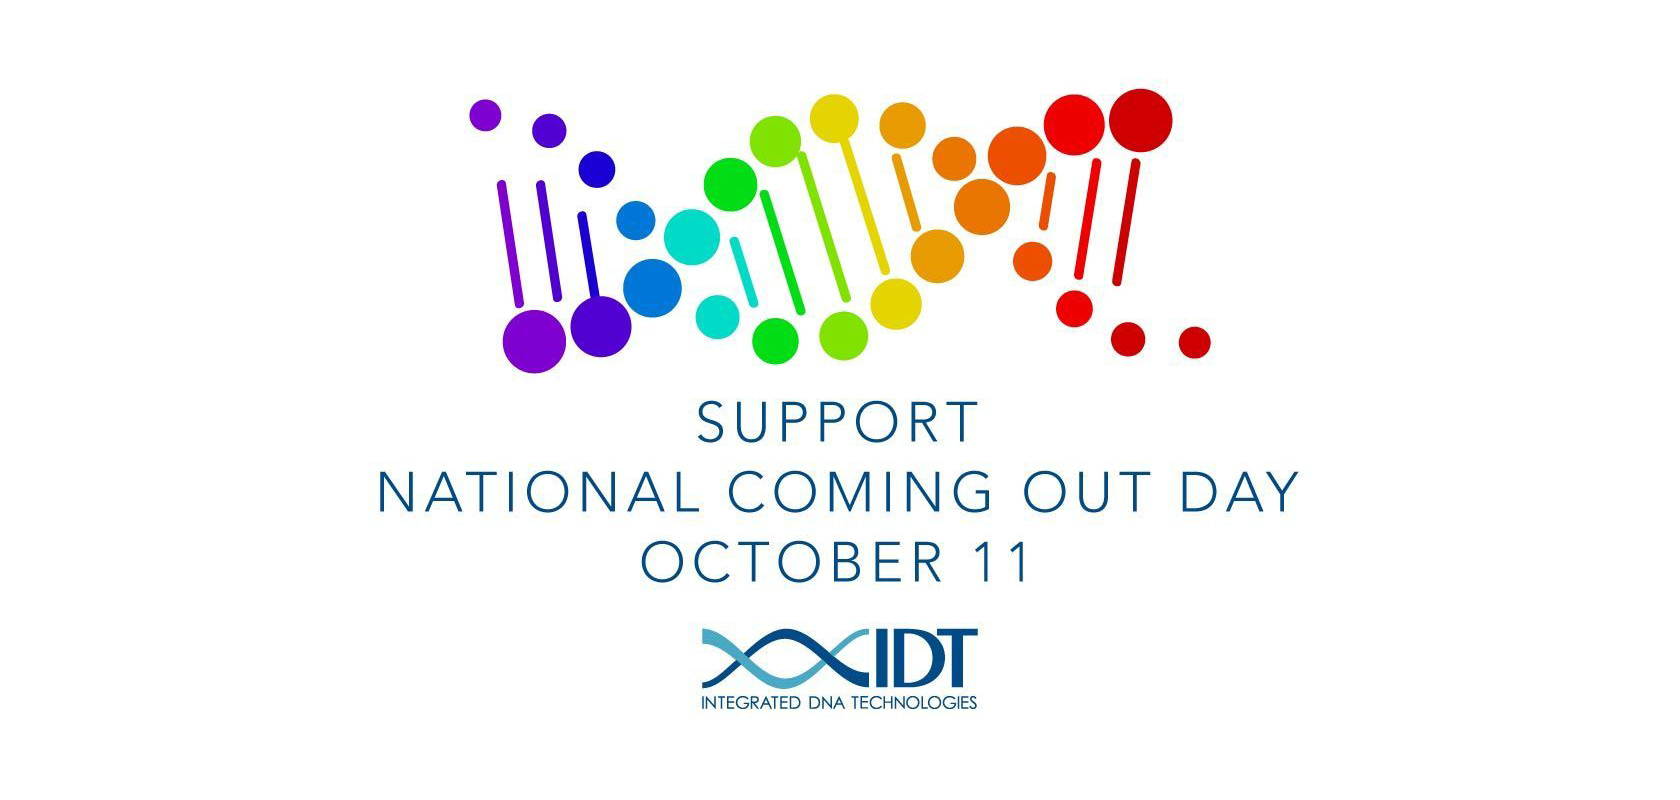 Happy National Coming Out Day!